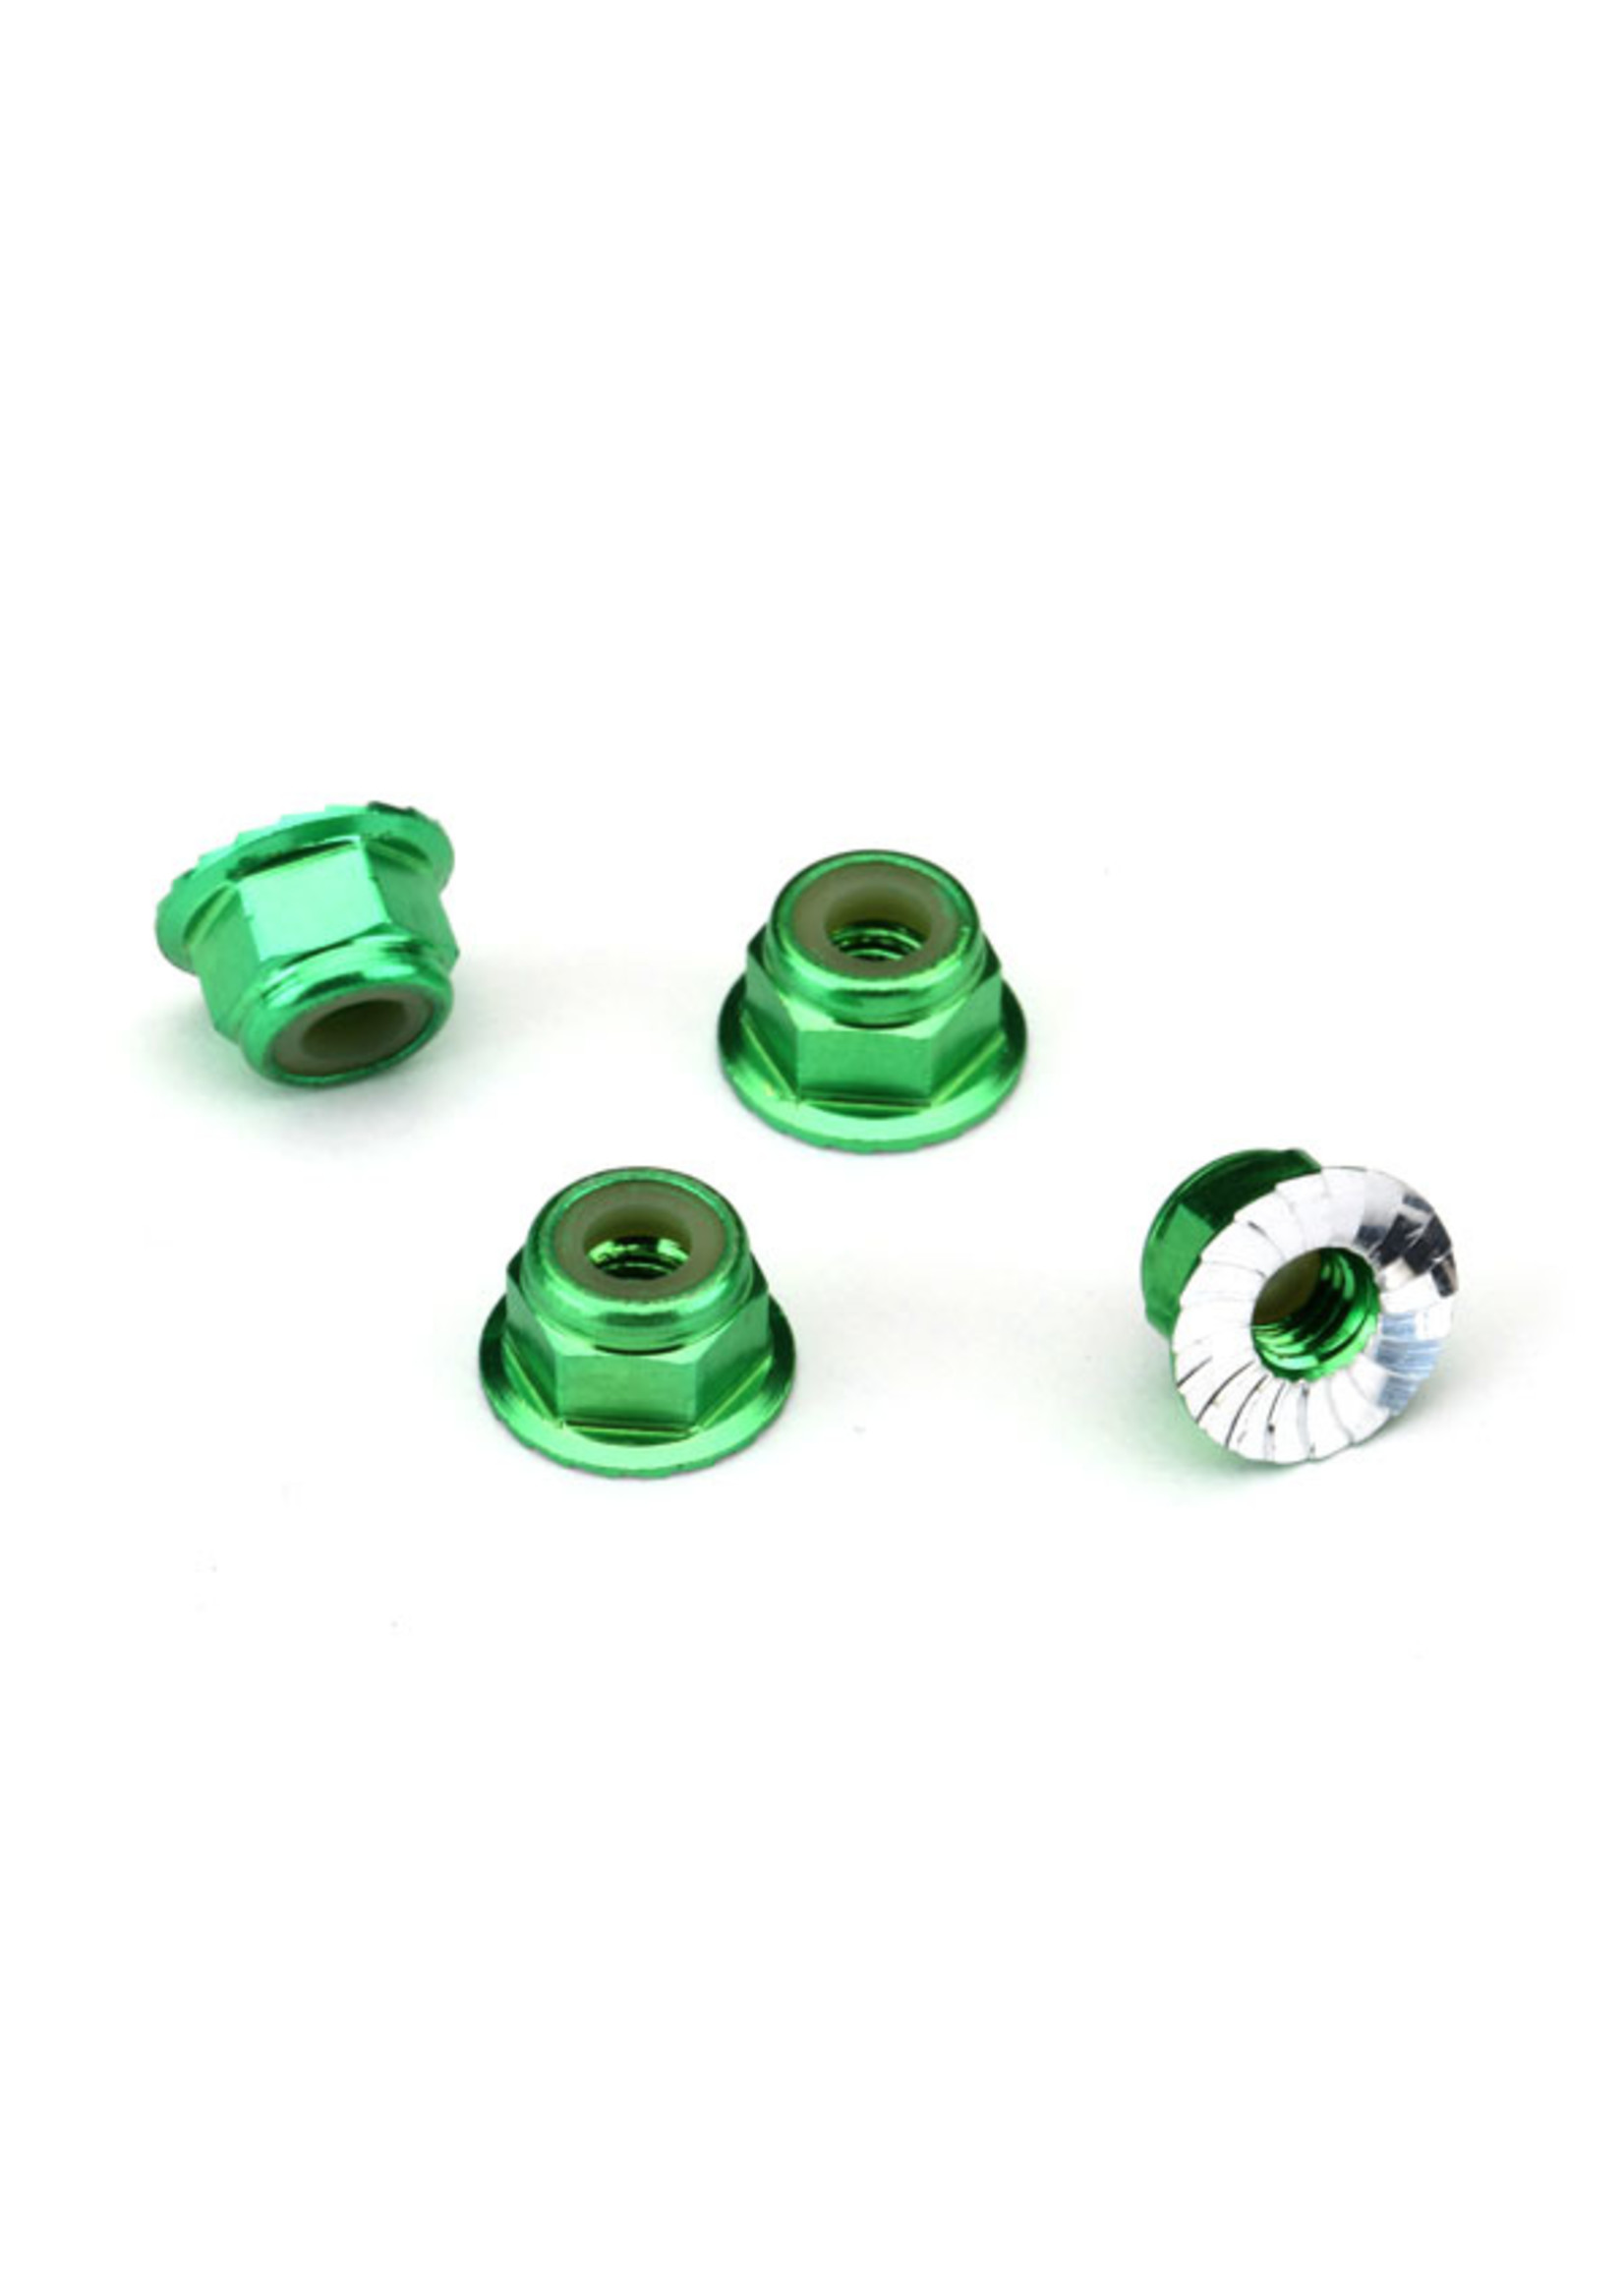 Traxxas 1747G - 4mm Aluminum Flanged Locking Nuts - Green